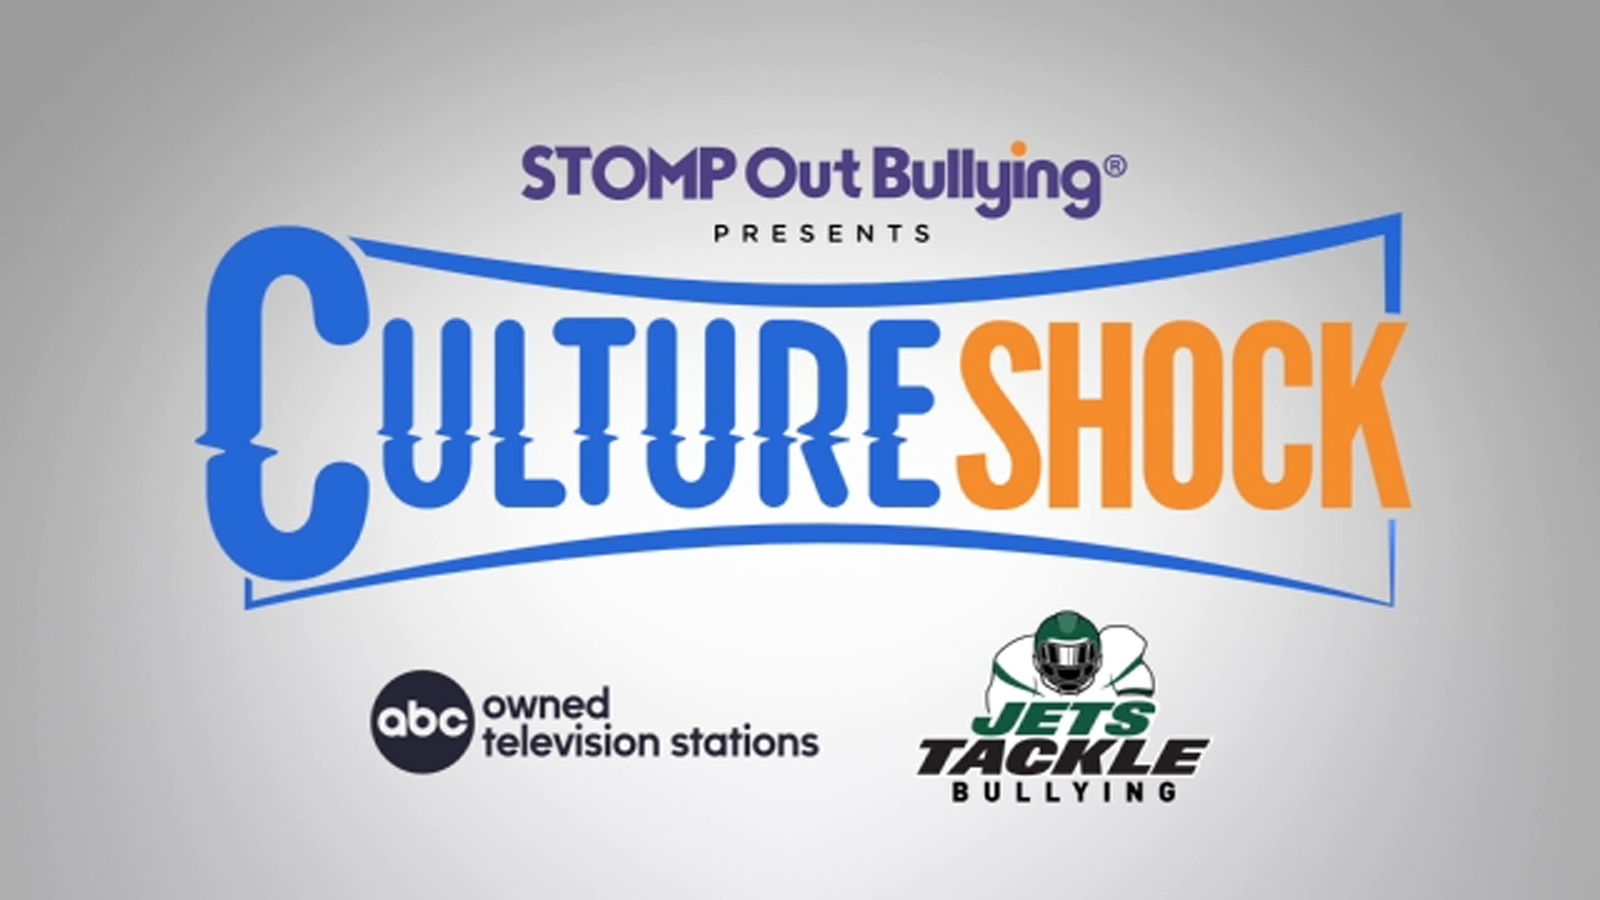 STOMP Out Bullying’s 6th Annual Culture Shock Event to educate students on homophobia, racism and hatred: How to watch live [Video]